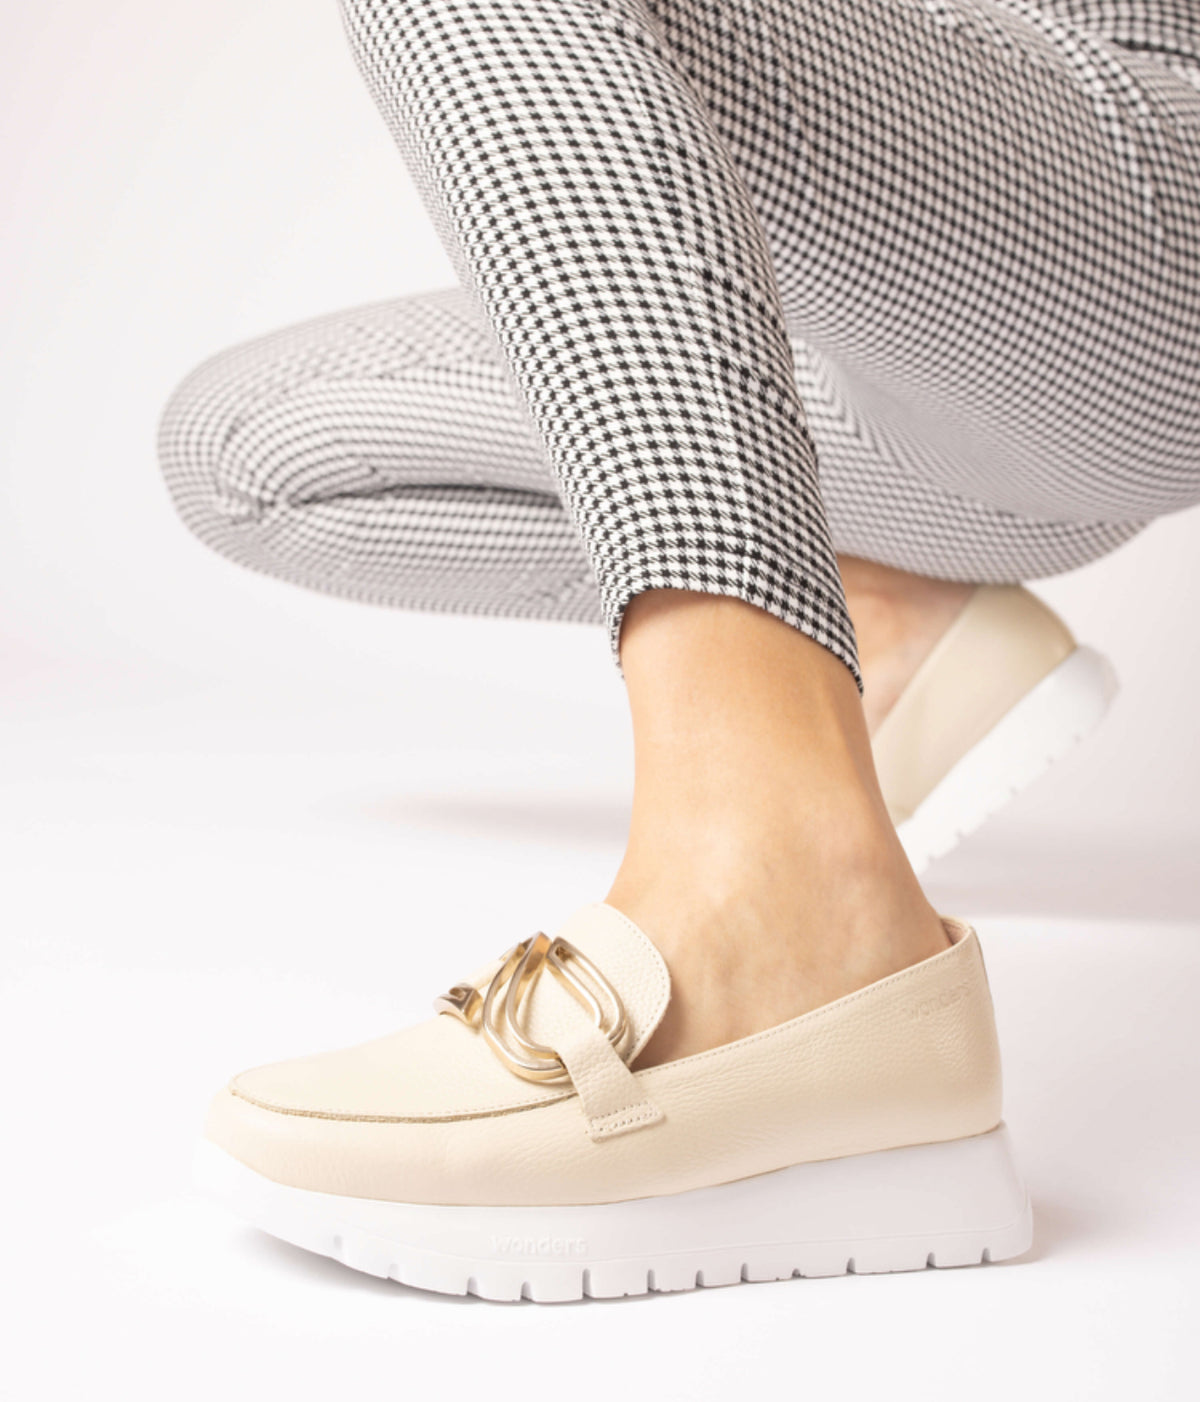 Wonders - A-2462 Beige Leather Wedge Moccasin